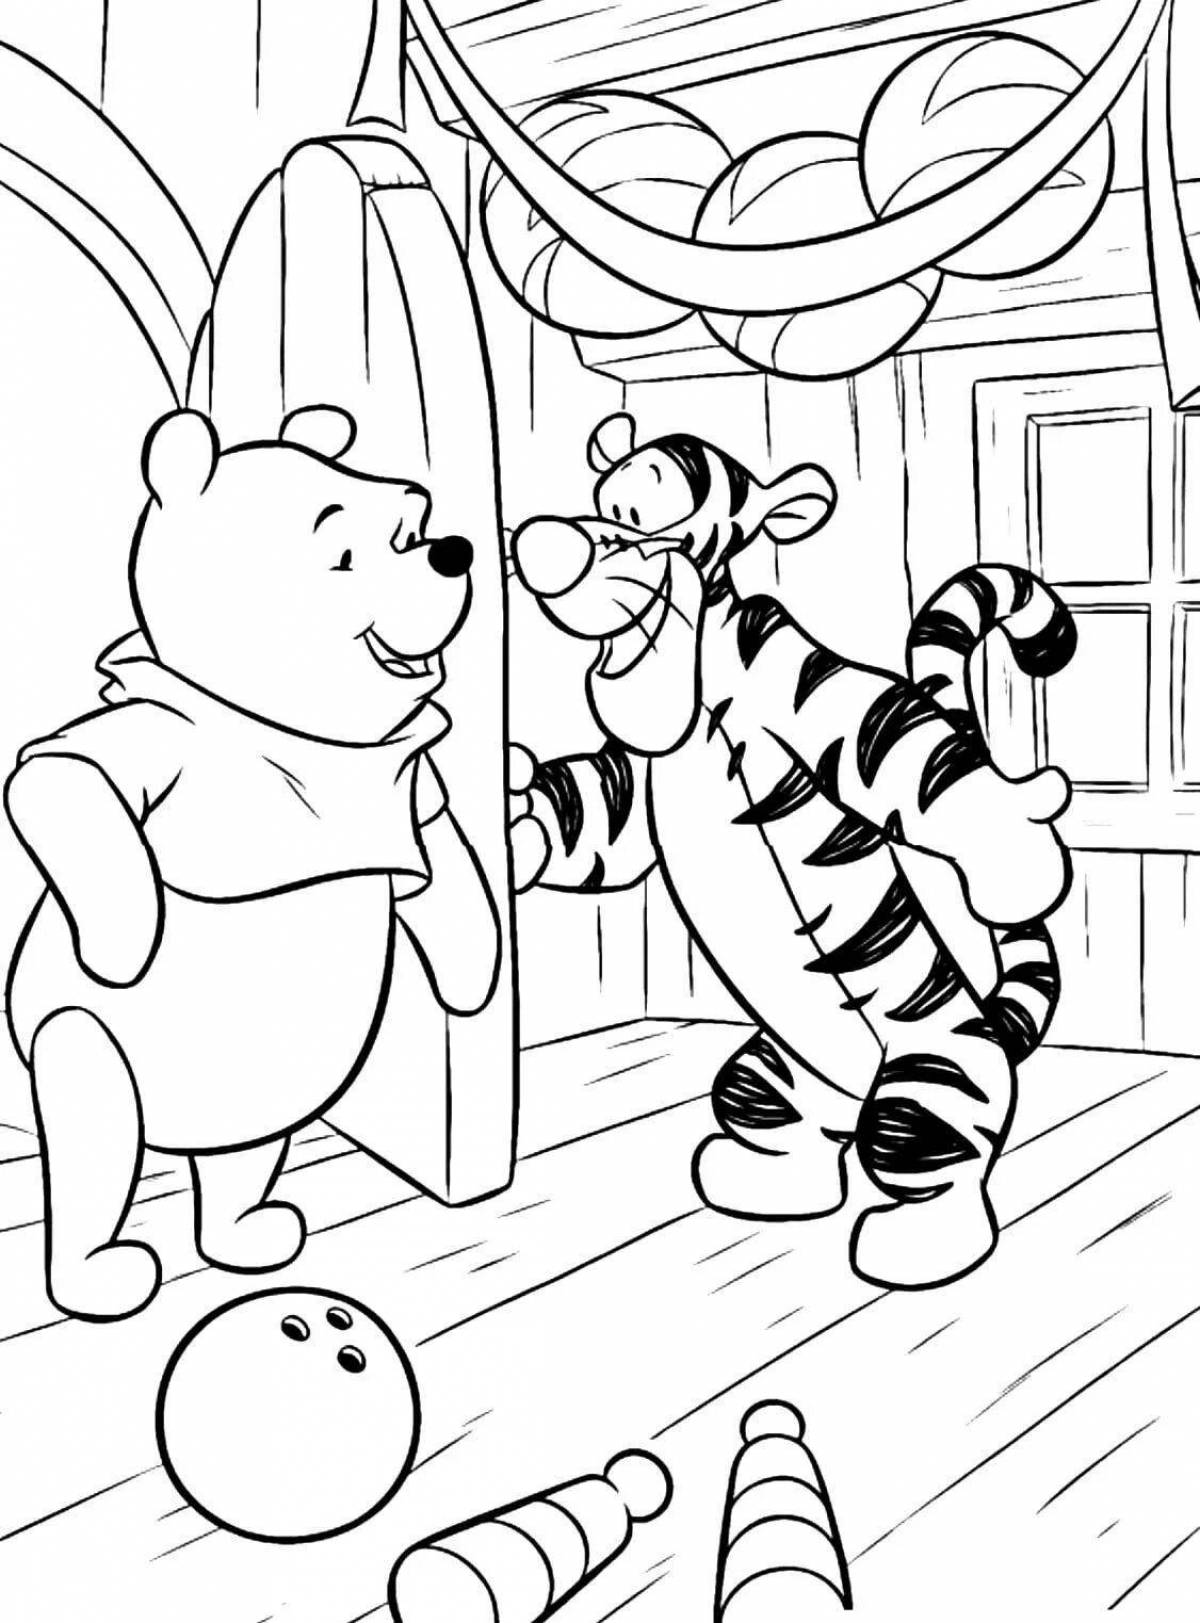 Winnie the pooh live coloring for kids